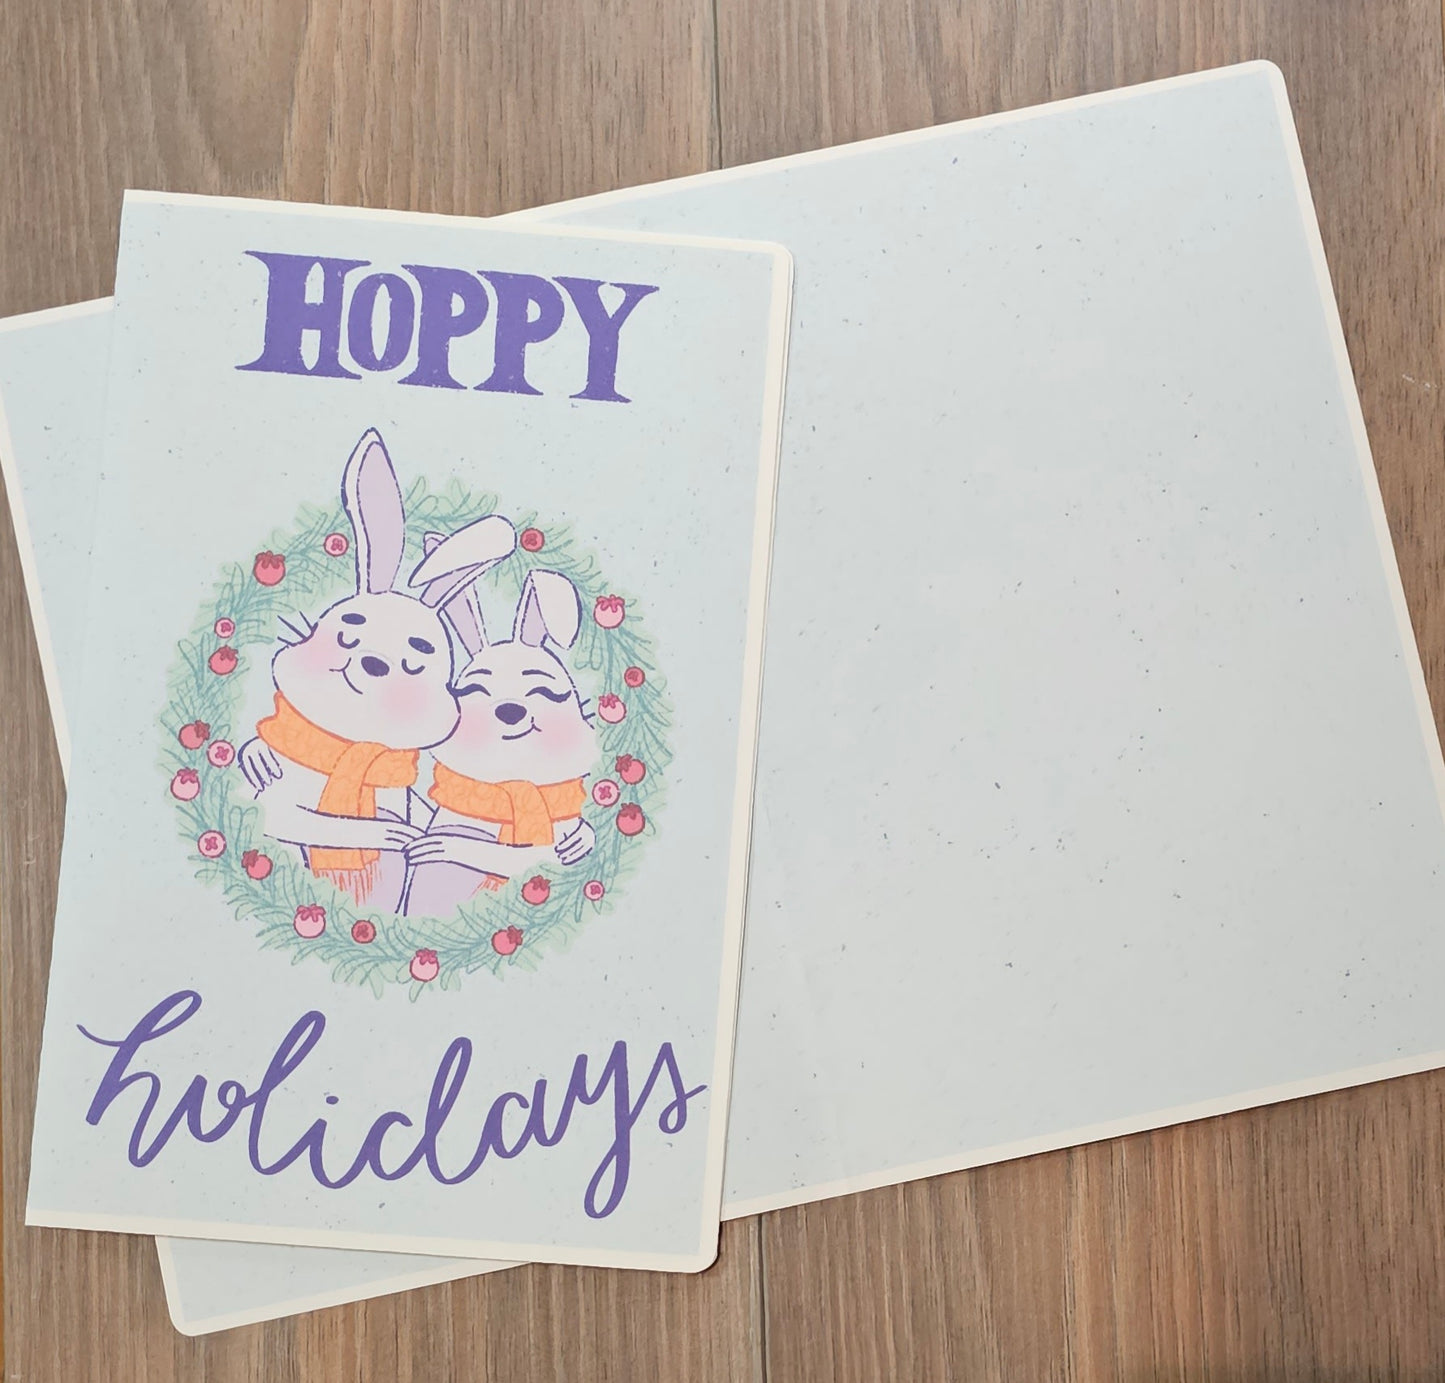 Hoppy Holidays Greeting Cards | Pack of 5